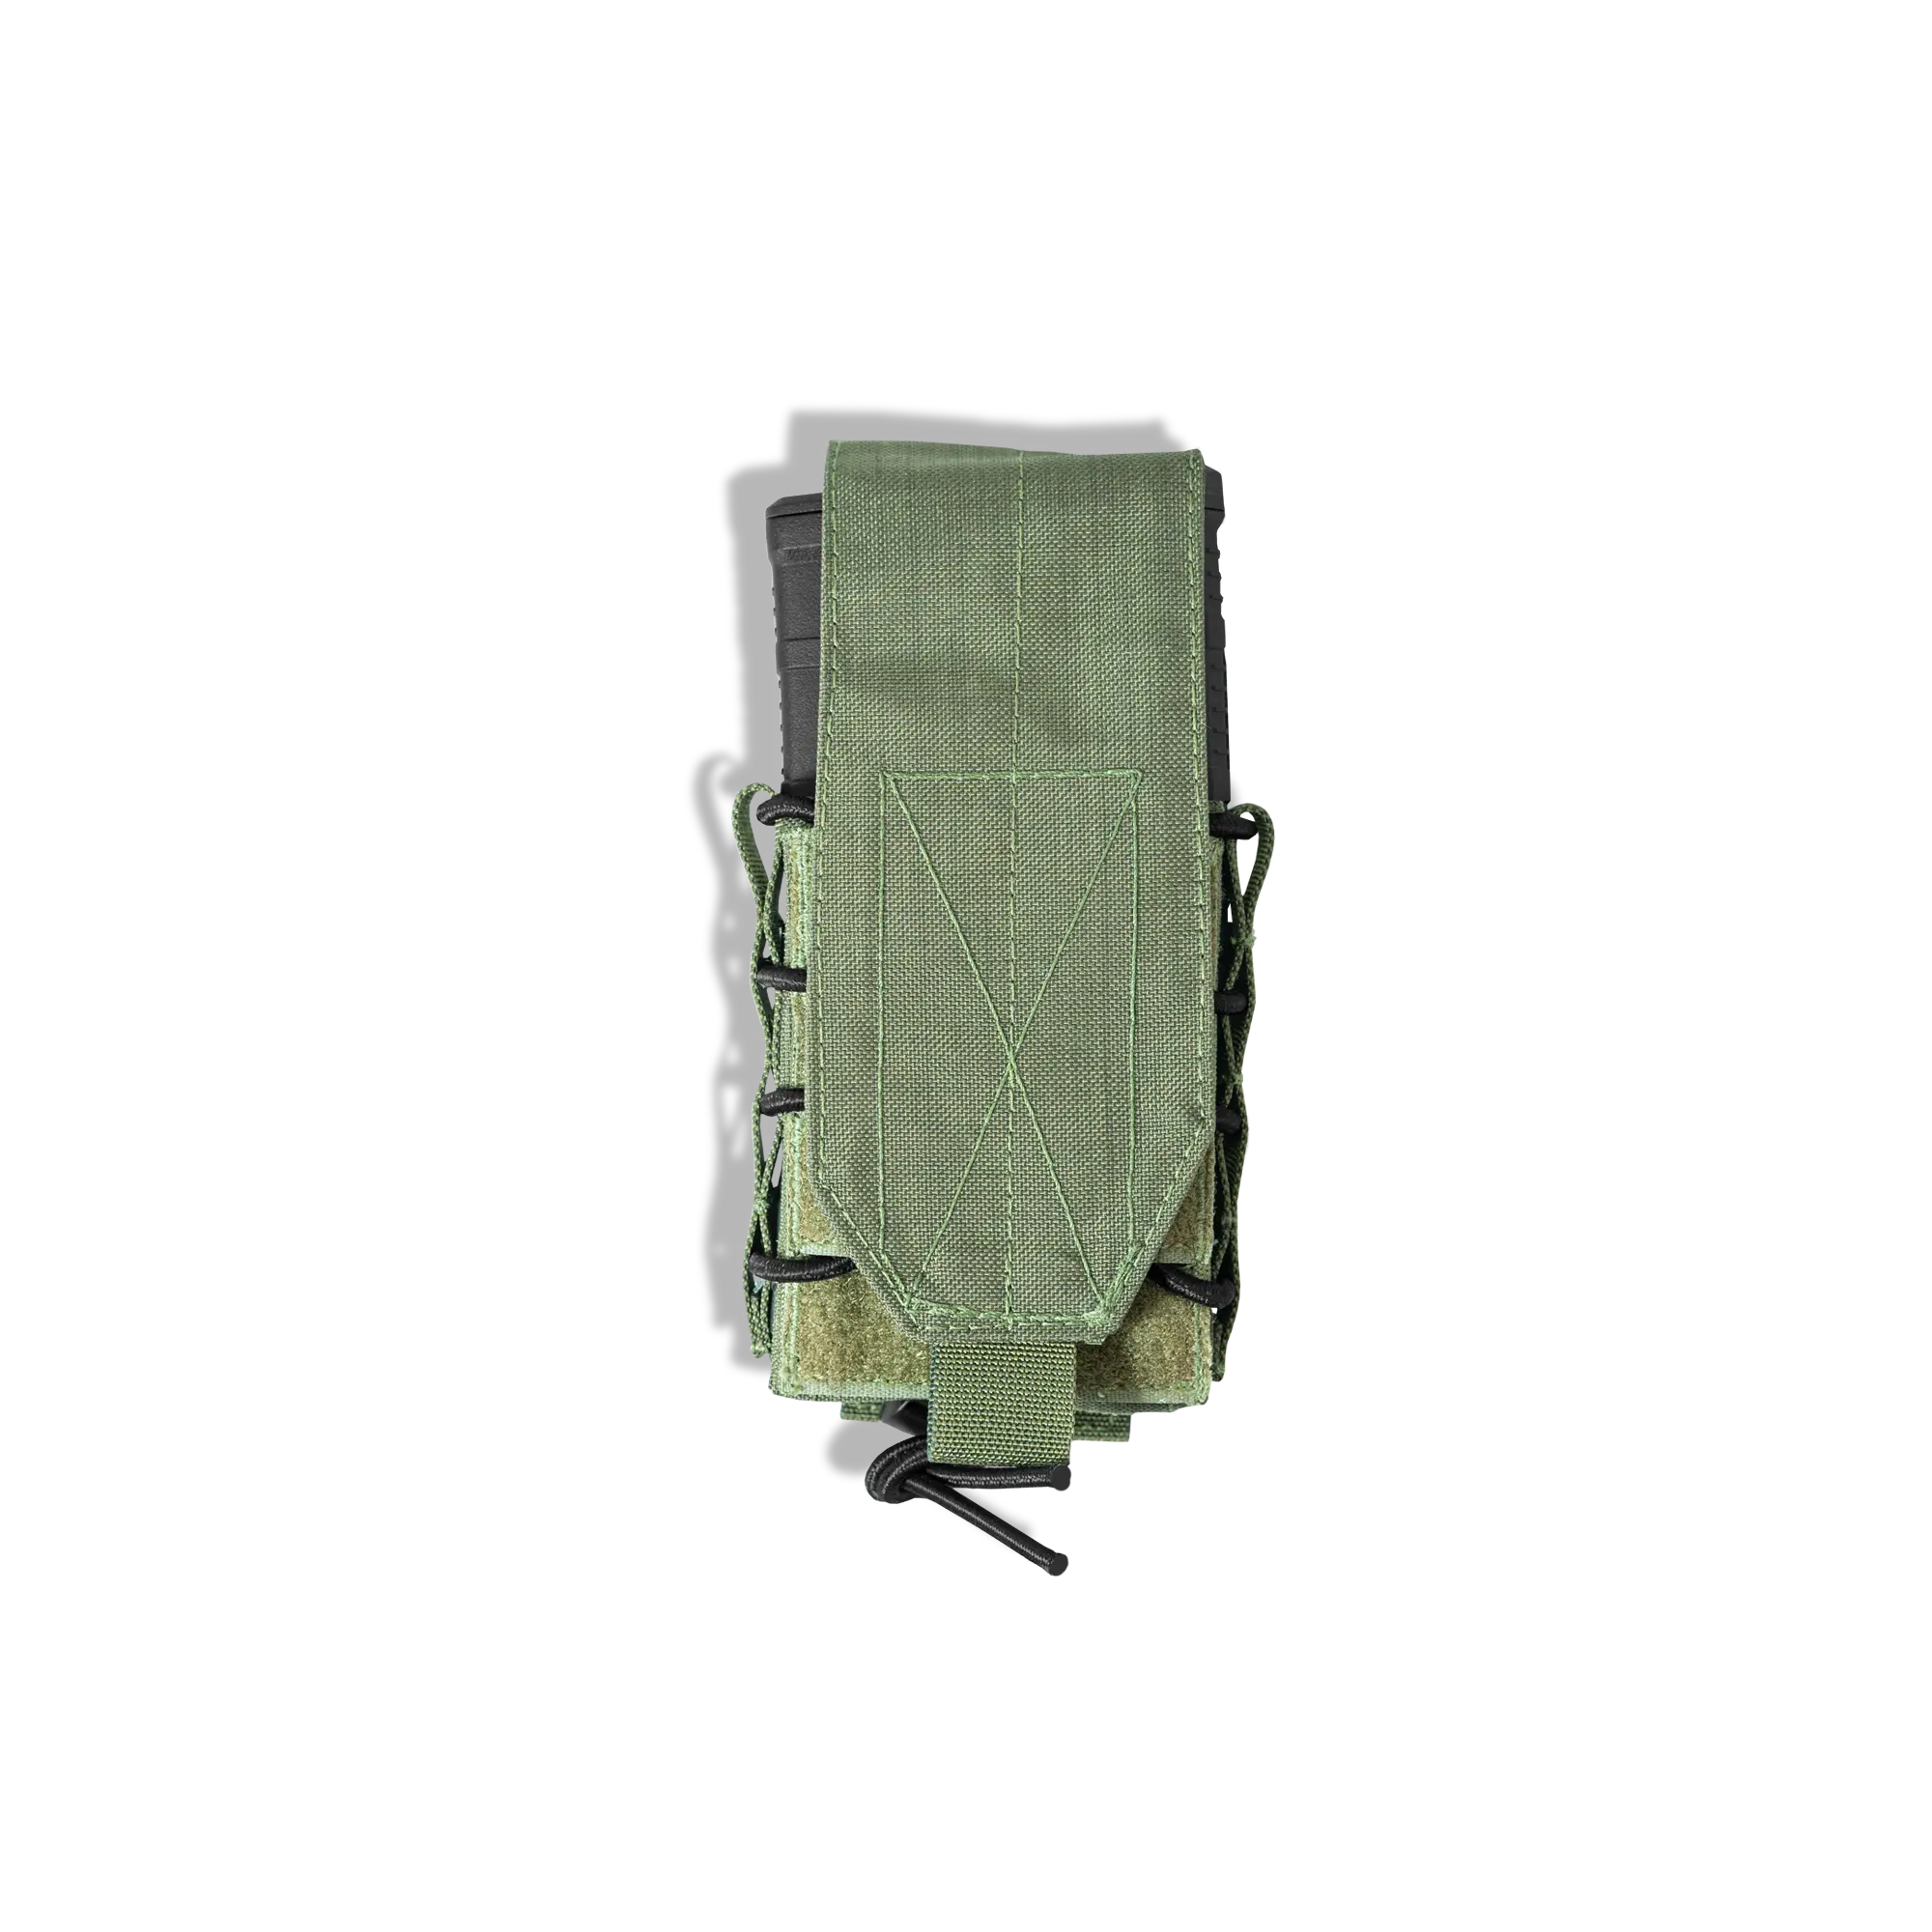 Rifle Mag Pouch 4 in_front flap